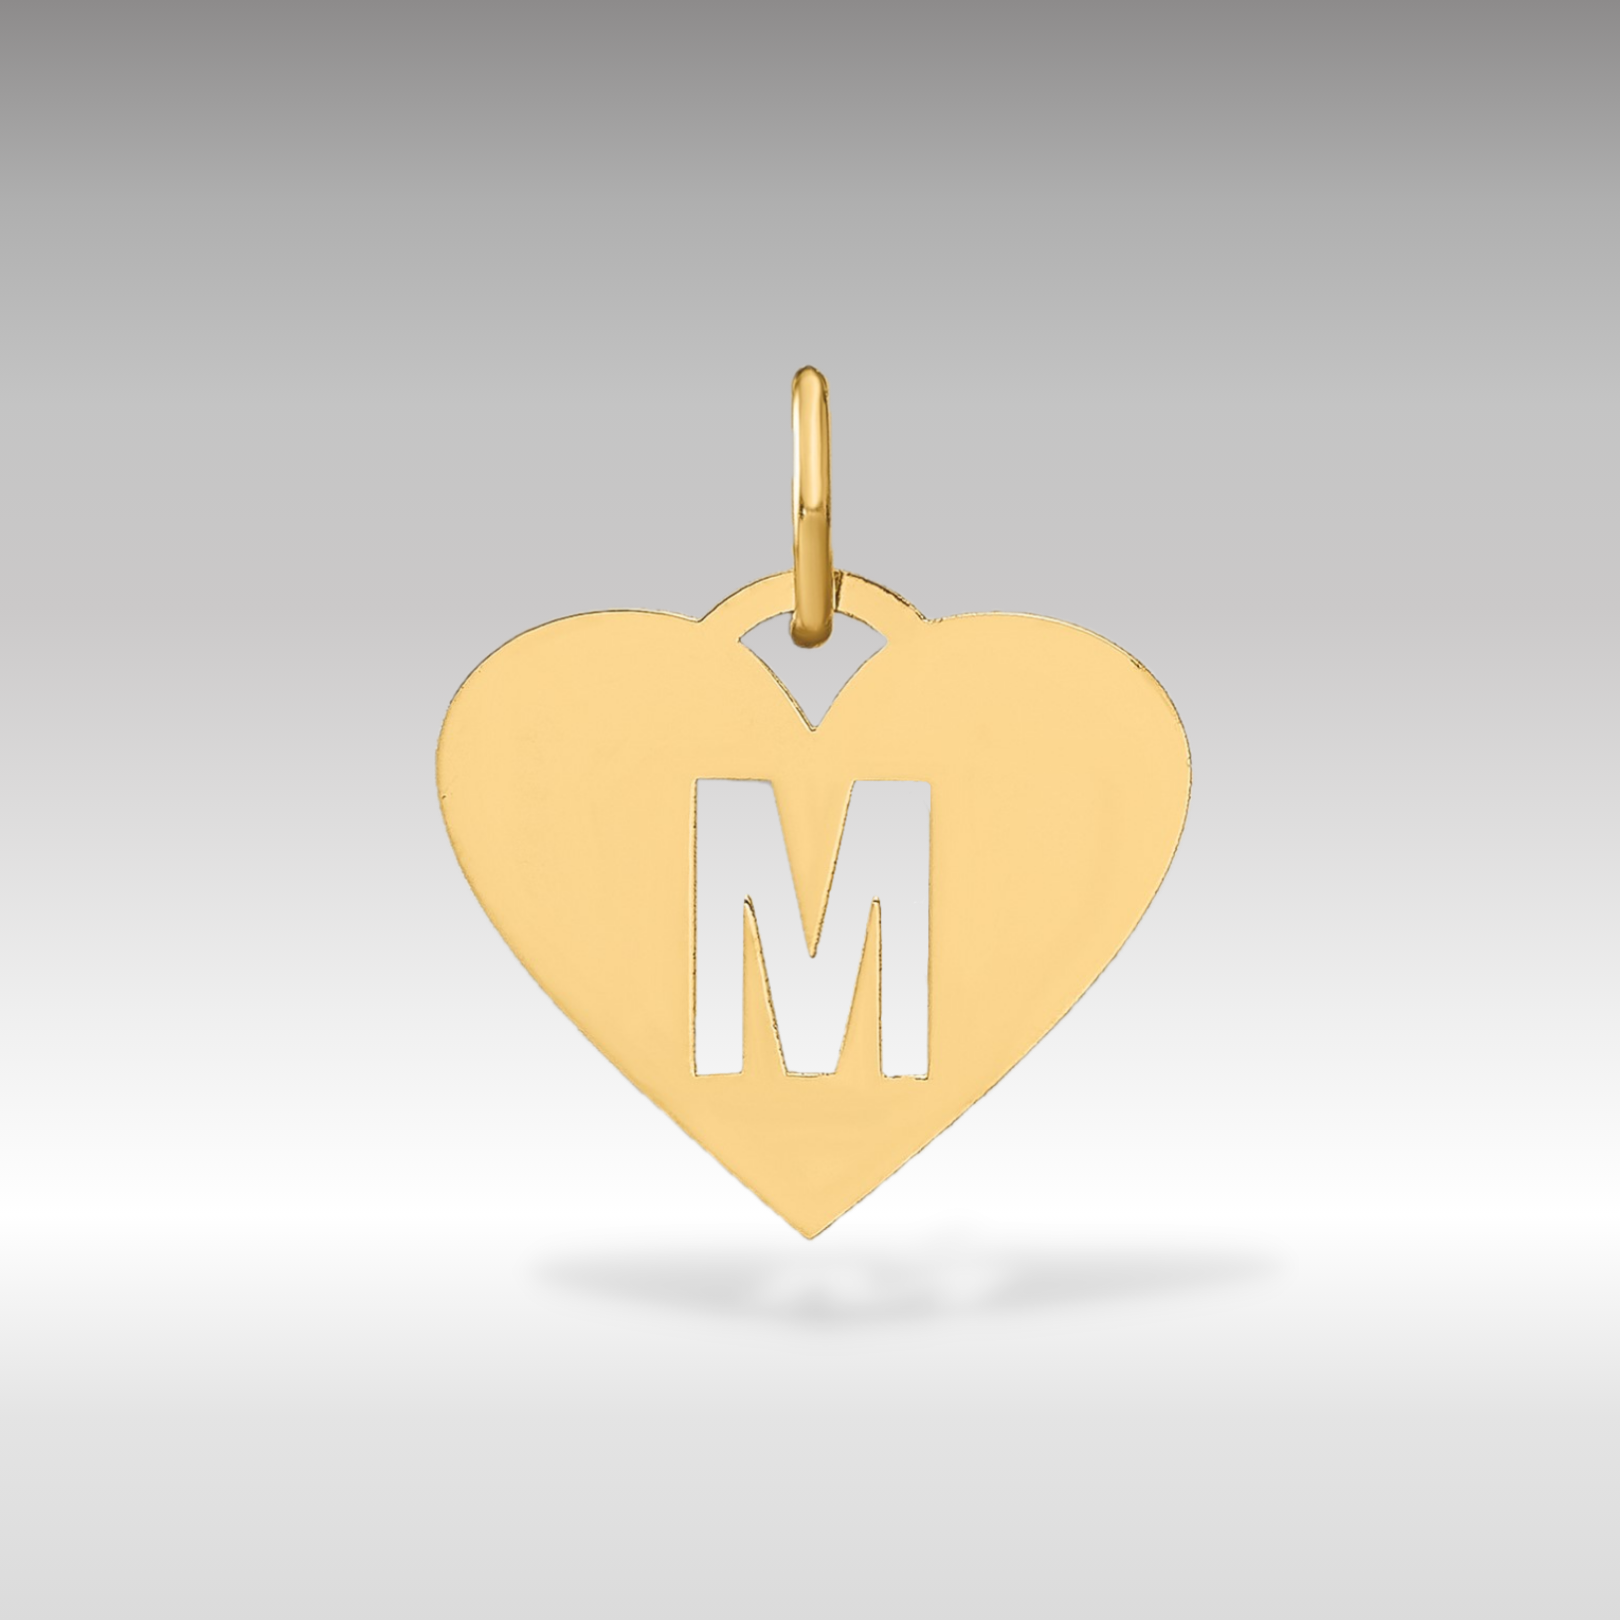 14K Gold Heart Pendant with Letter 'M' - Charlie & Co. Jewelry